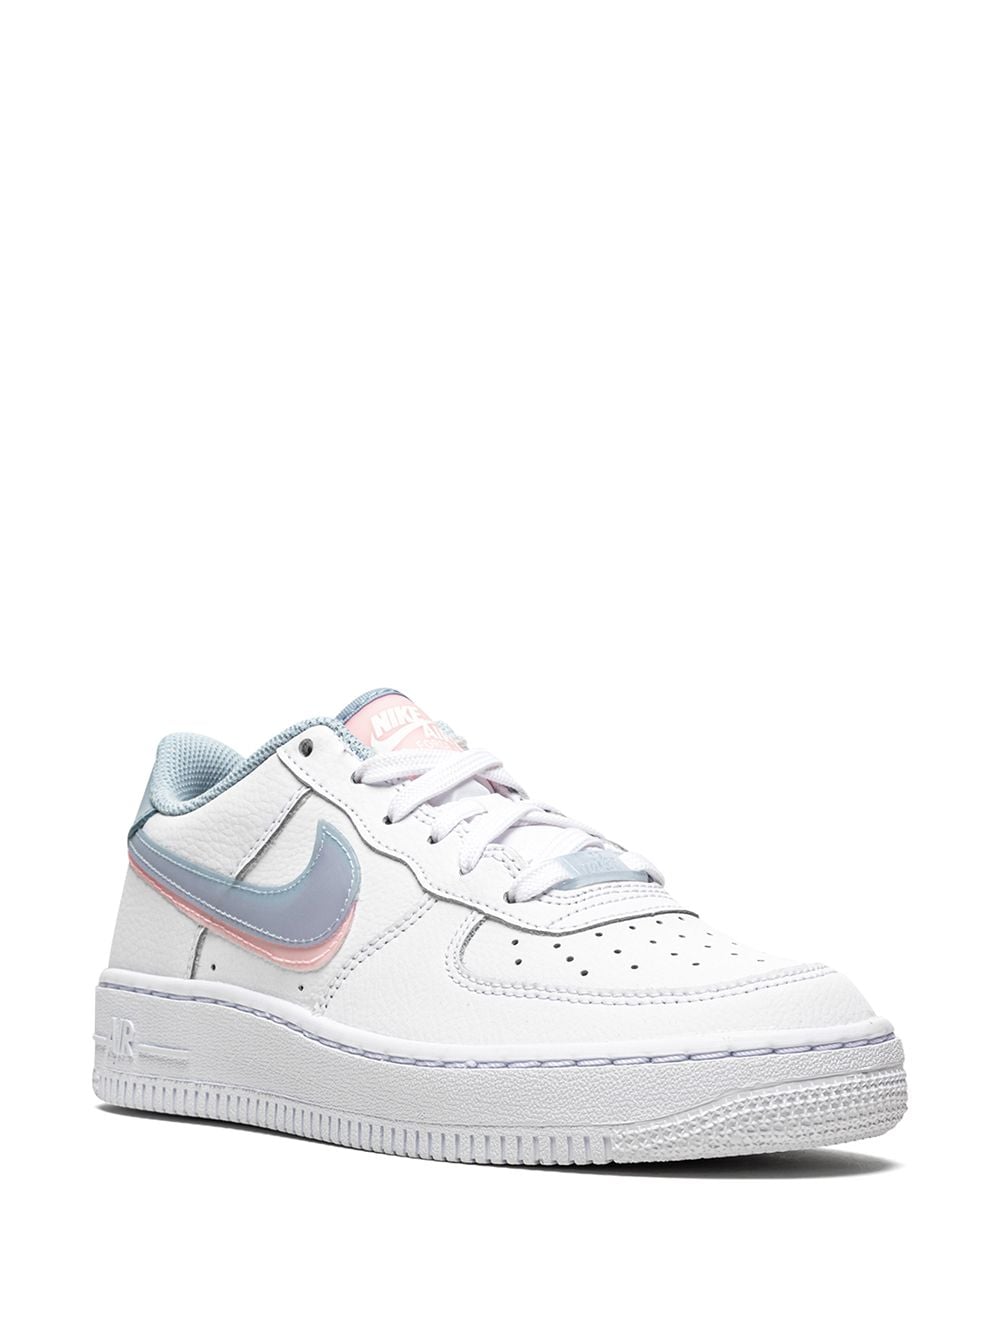 Nike Force One 07 Lv8 DOUBLE SWOOSH